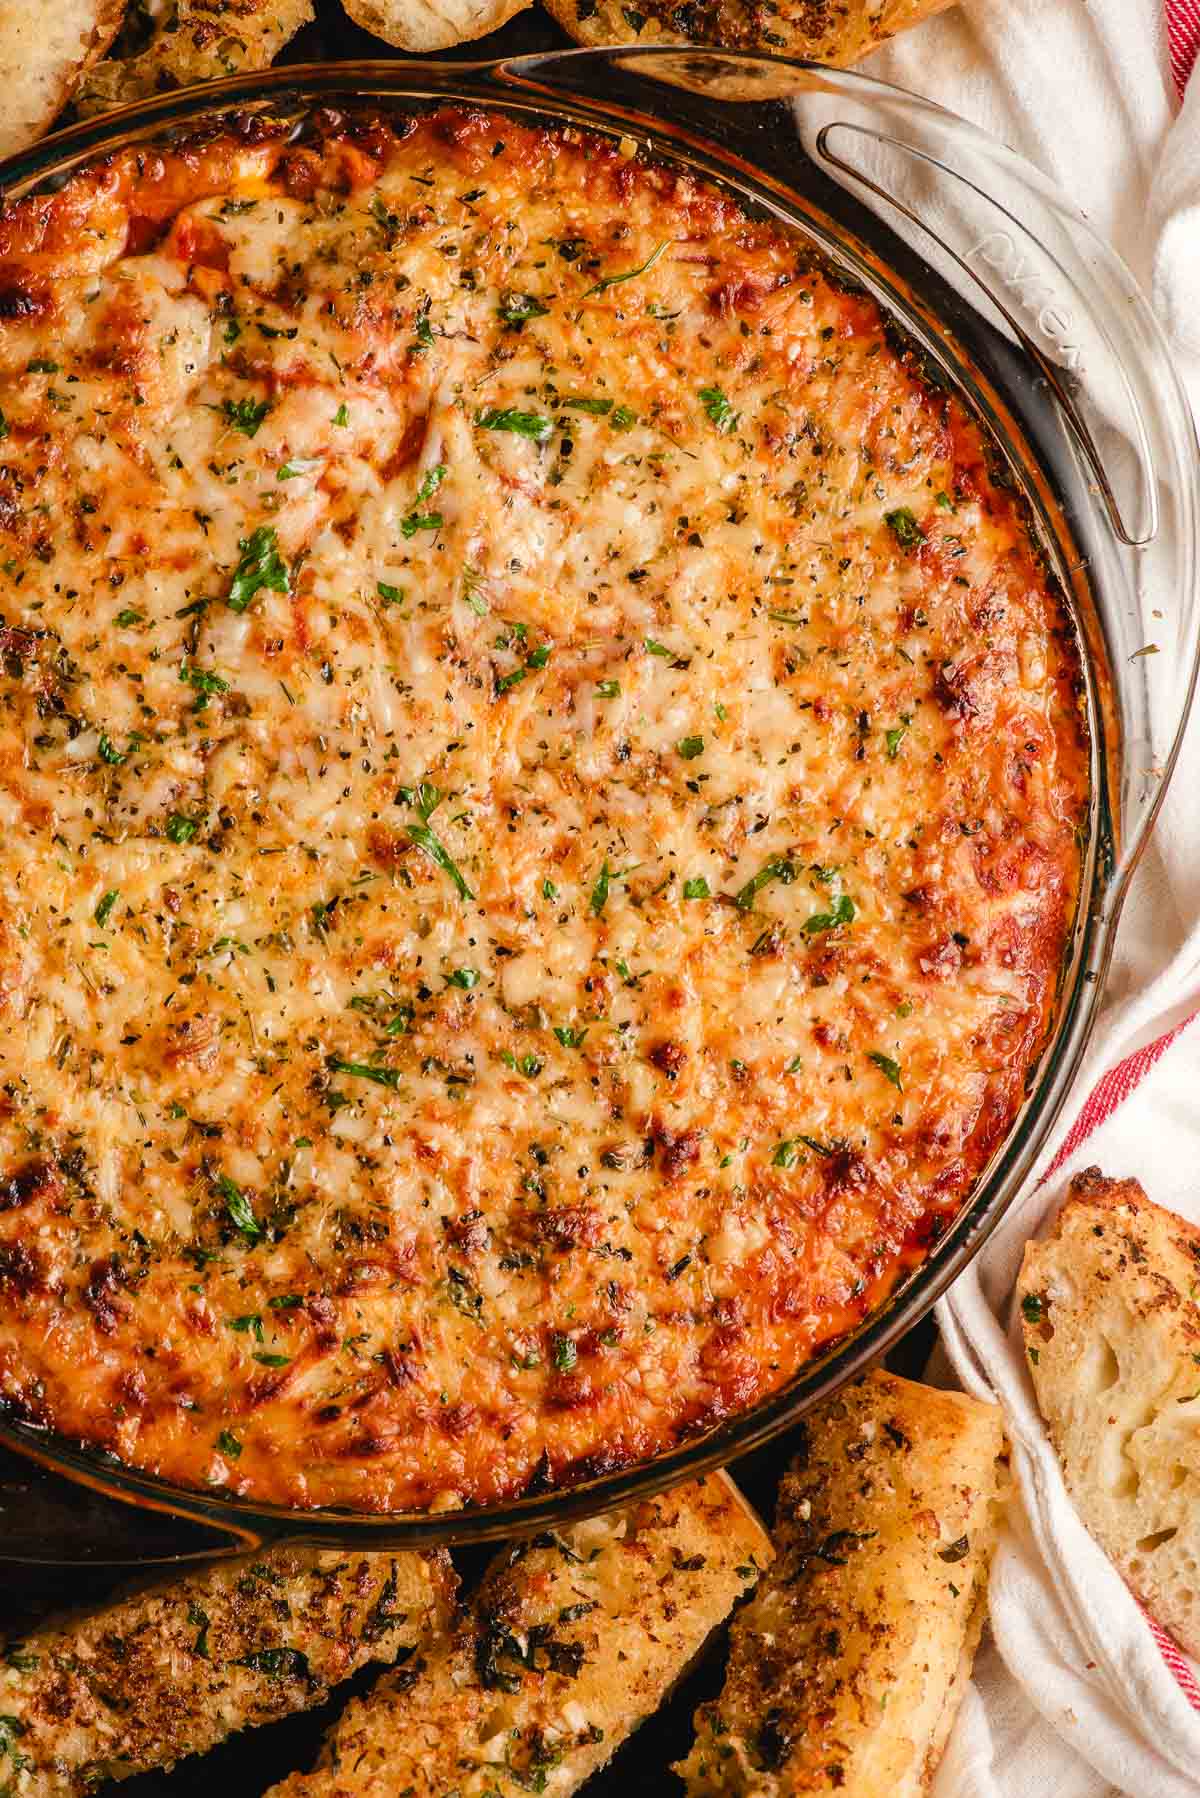 Hot baked lasagna dip in a glass pie dish with garlic bread dippers on the side.